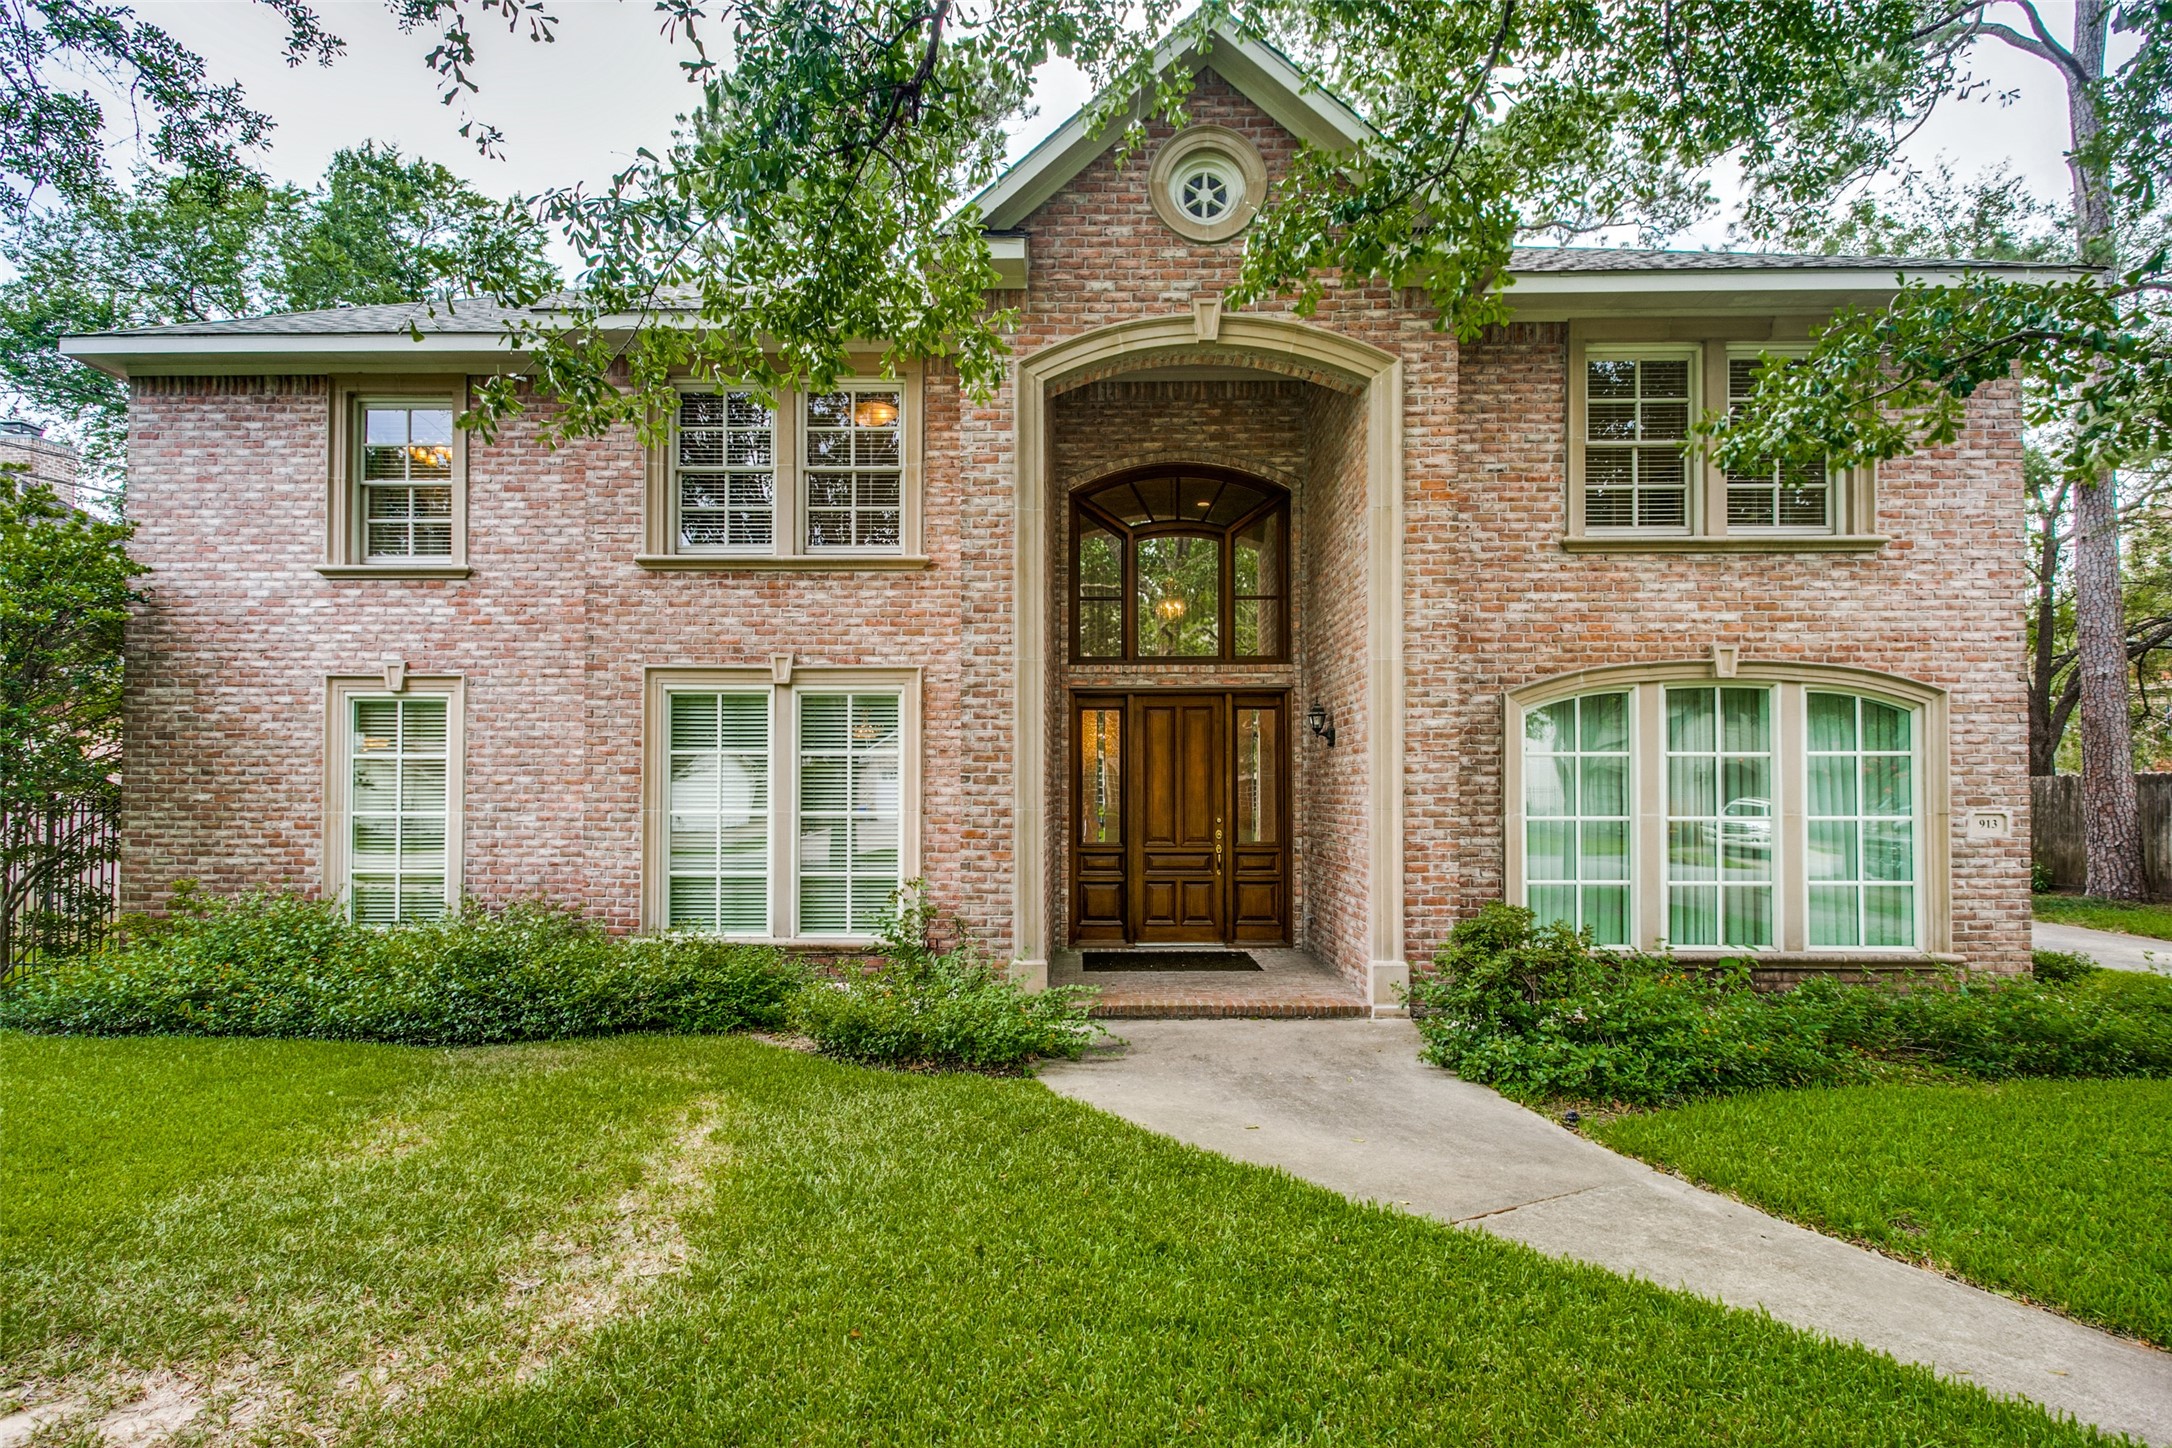 913 Magdalene Dr. is located in the Hedwig Village community in the City of Houston. This beautiful 4/3.5/2 Two story traditional was built by the current homeowners in 1998. The home is set on an interior lot between two homes of recent construction. The lot is approximately 12480 SF per HCAD. Spring Branch ISD is the school district and the home is also in walking distance of St. Cecelia's private school and Memorial HS.